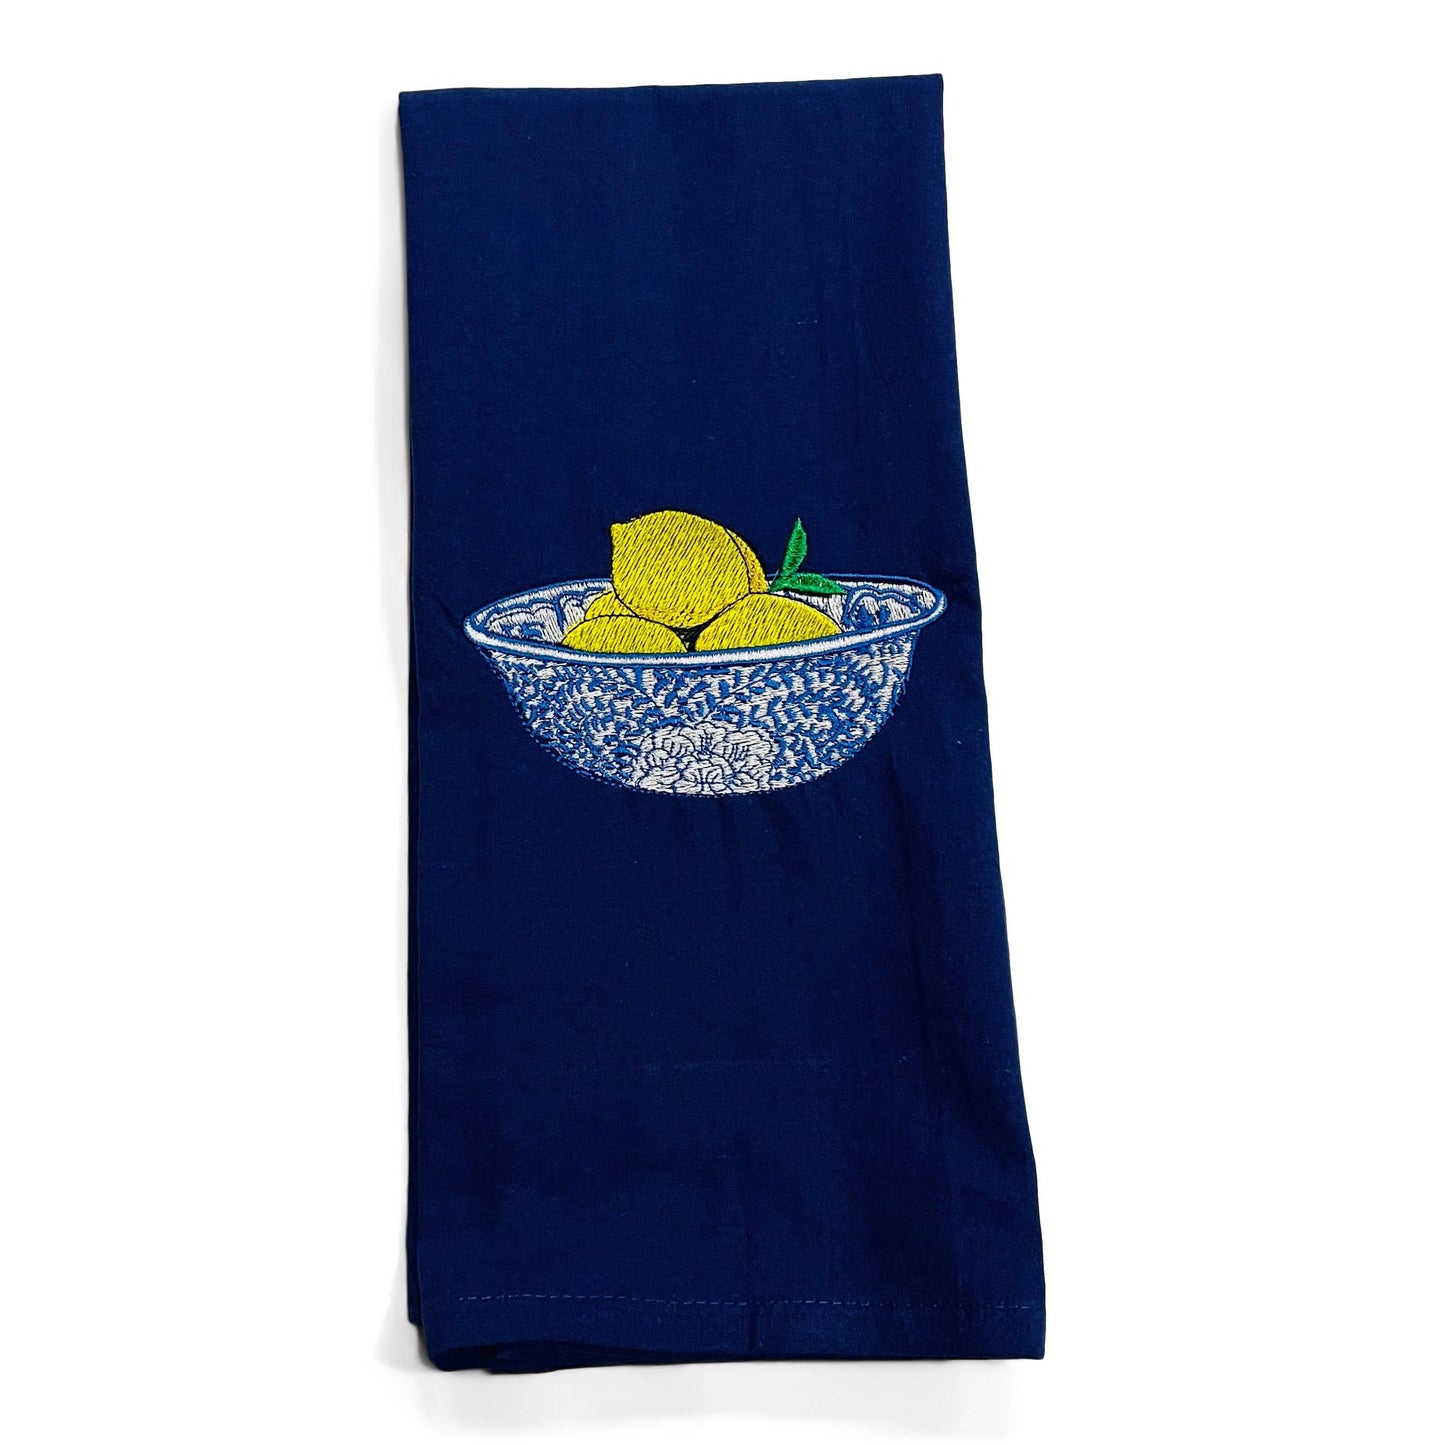 Lemons in a Blue and White Chinoiserie Dish